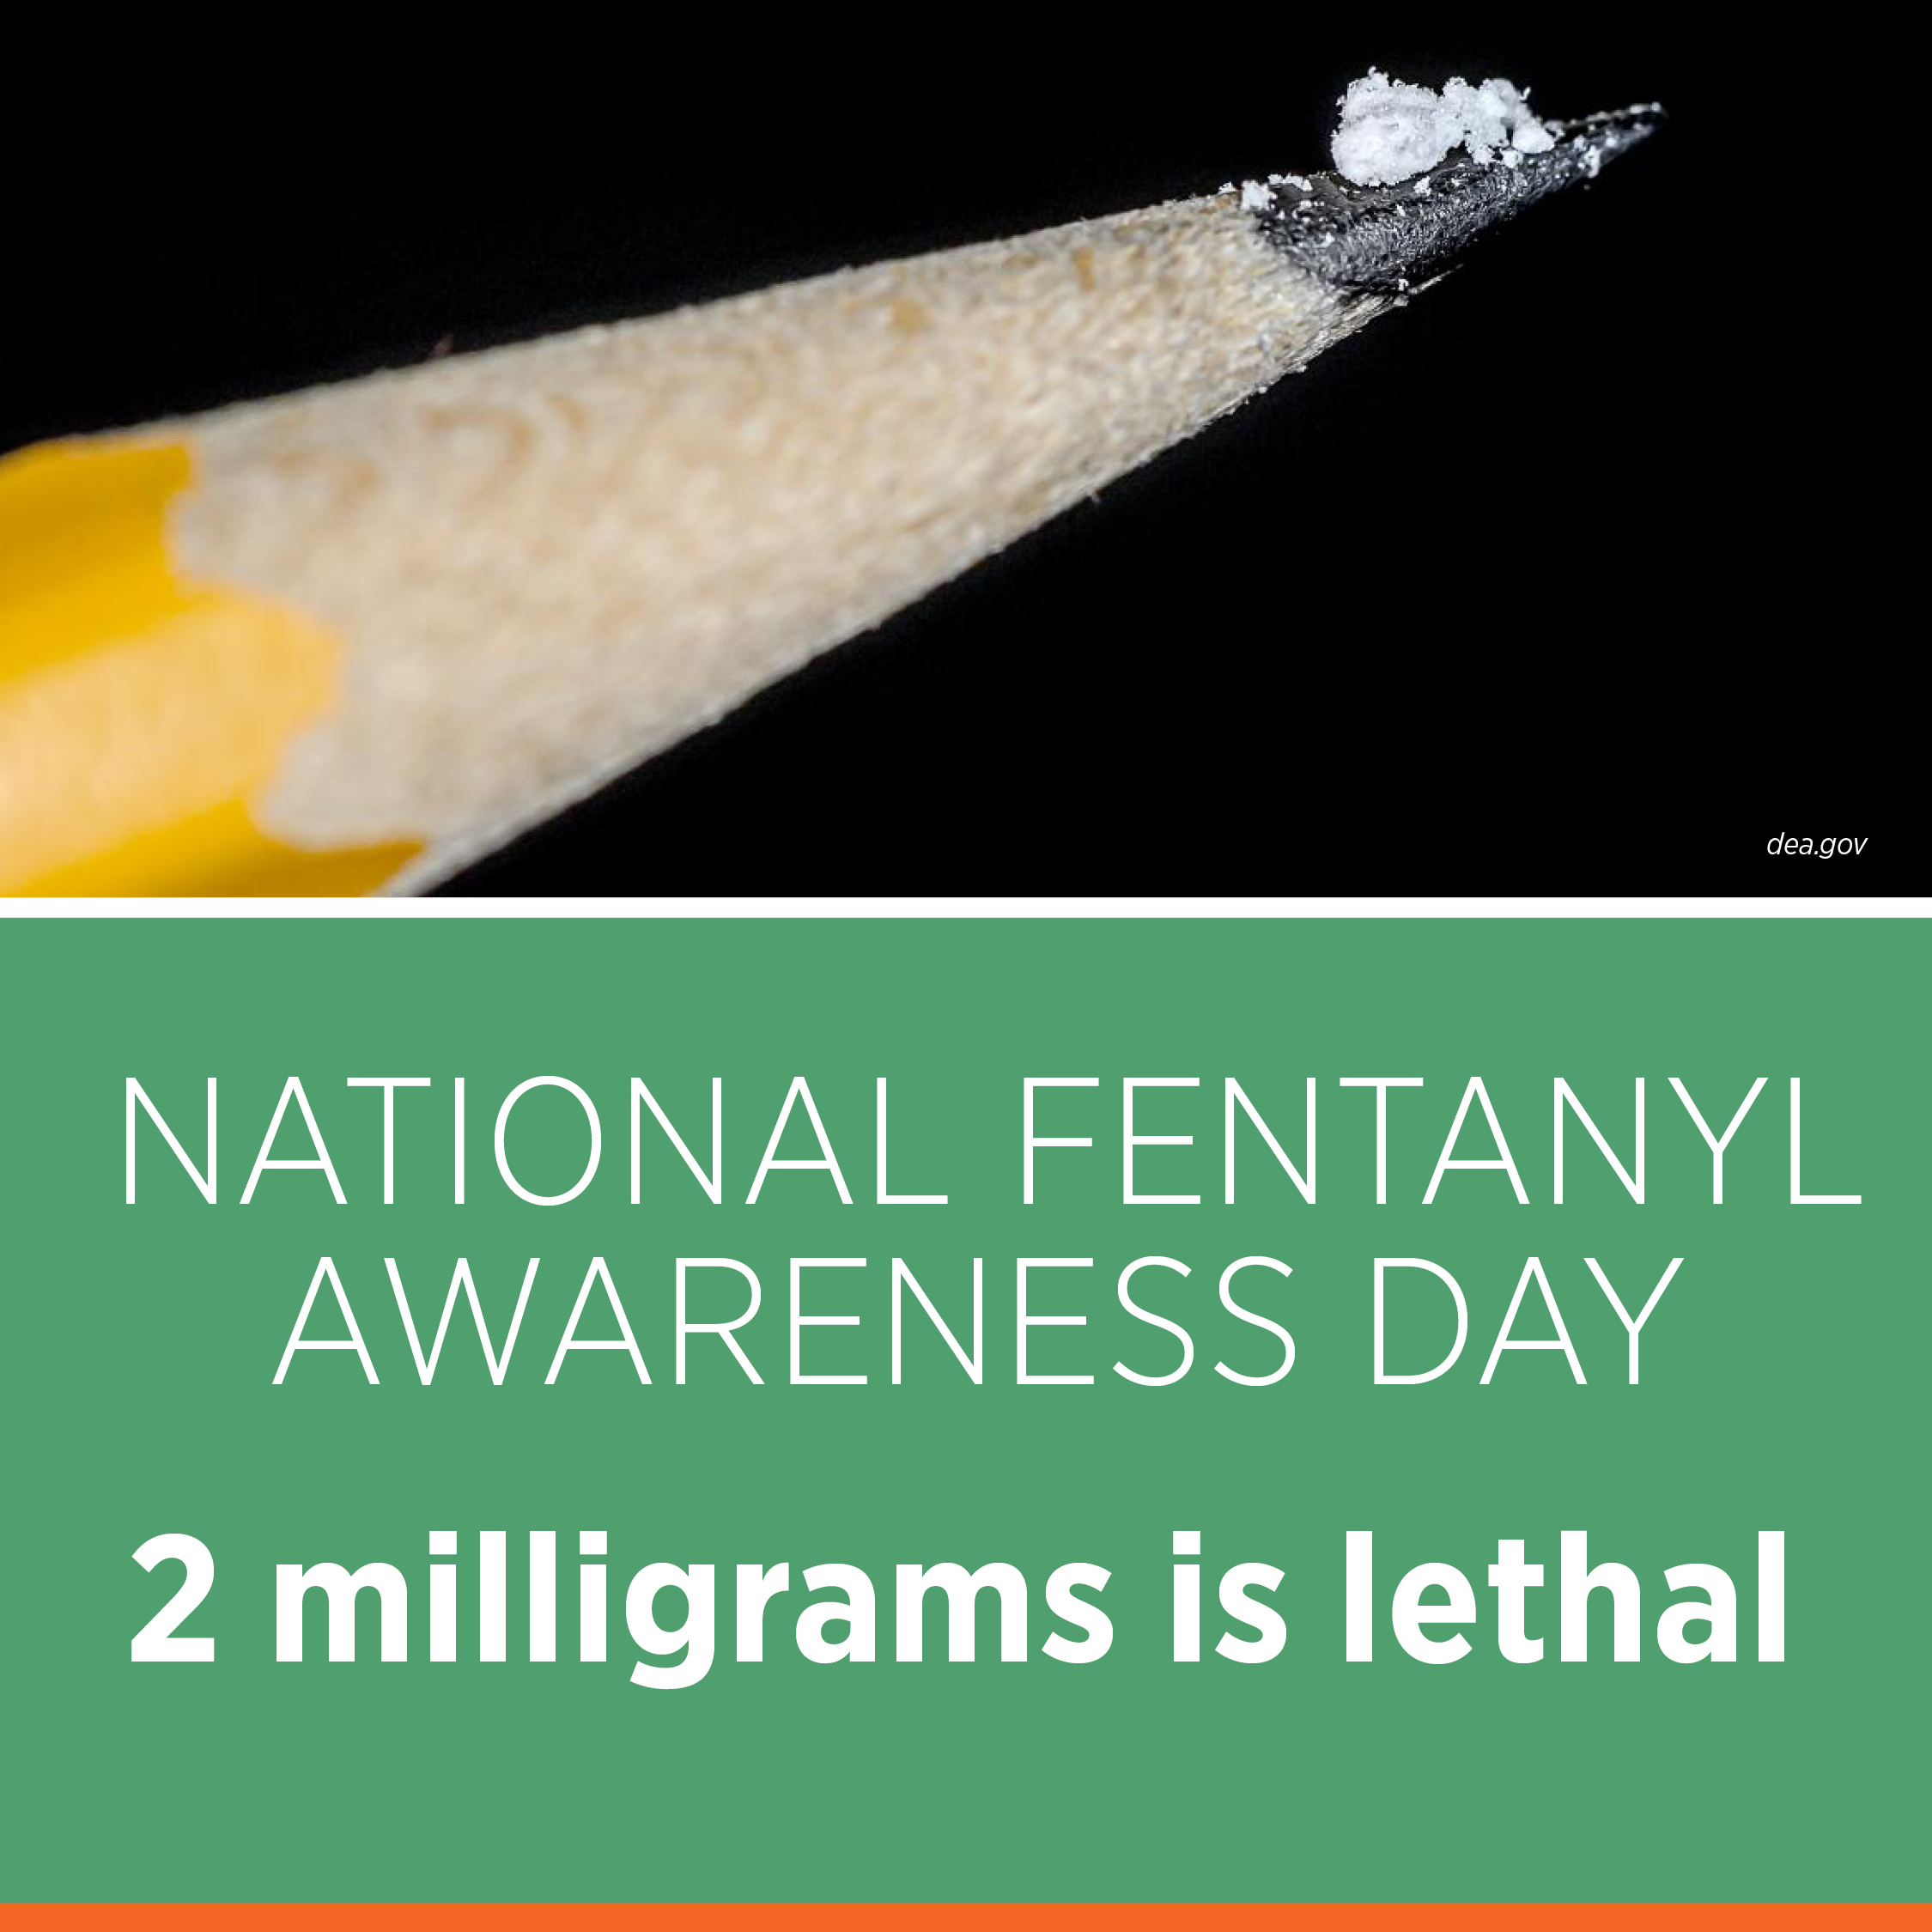 An authentic lethal dose of fentanyl is displayed on the point of a number 2 pencil for size reference.